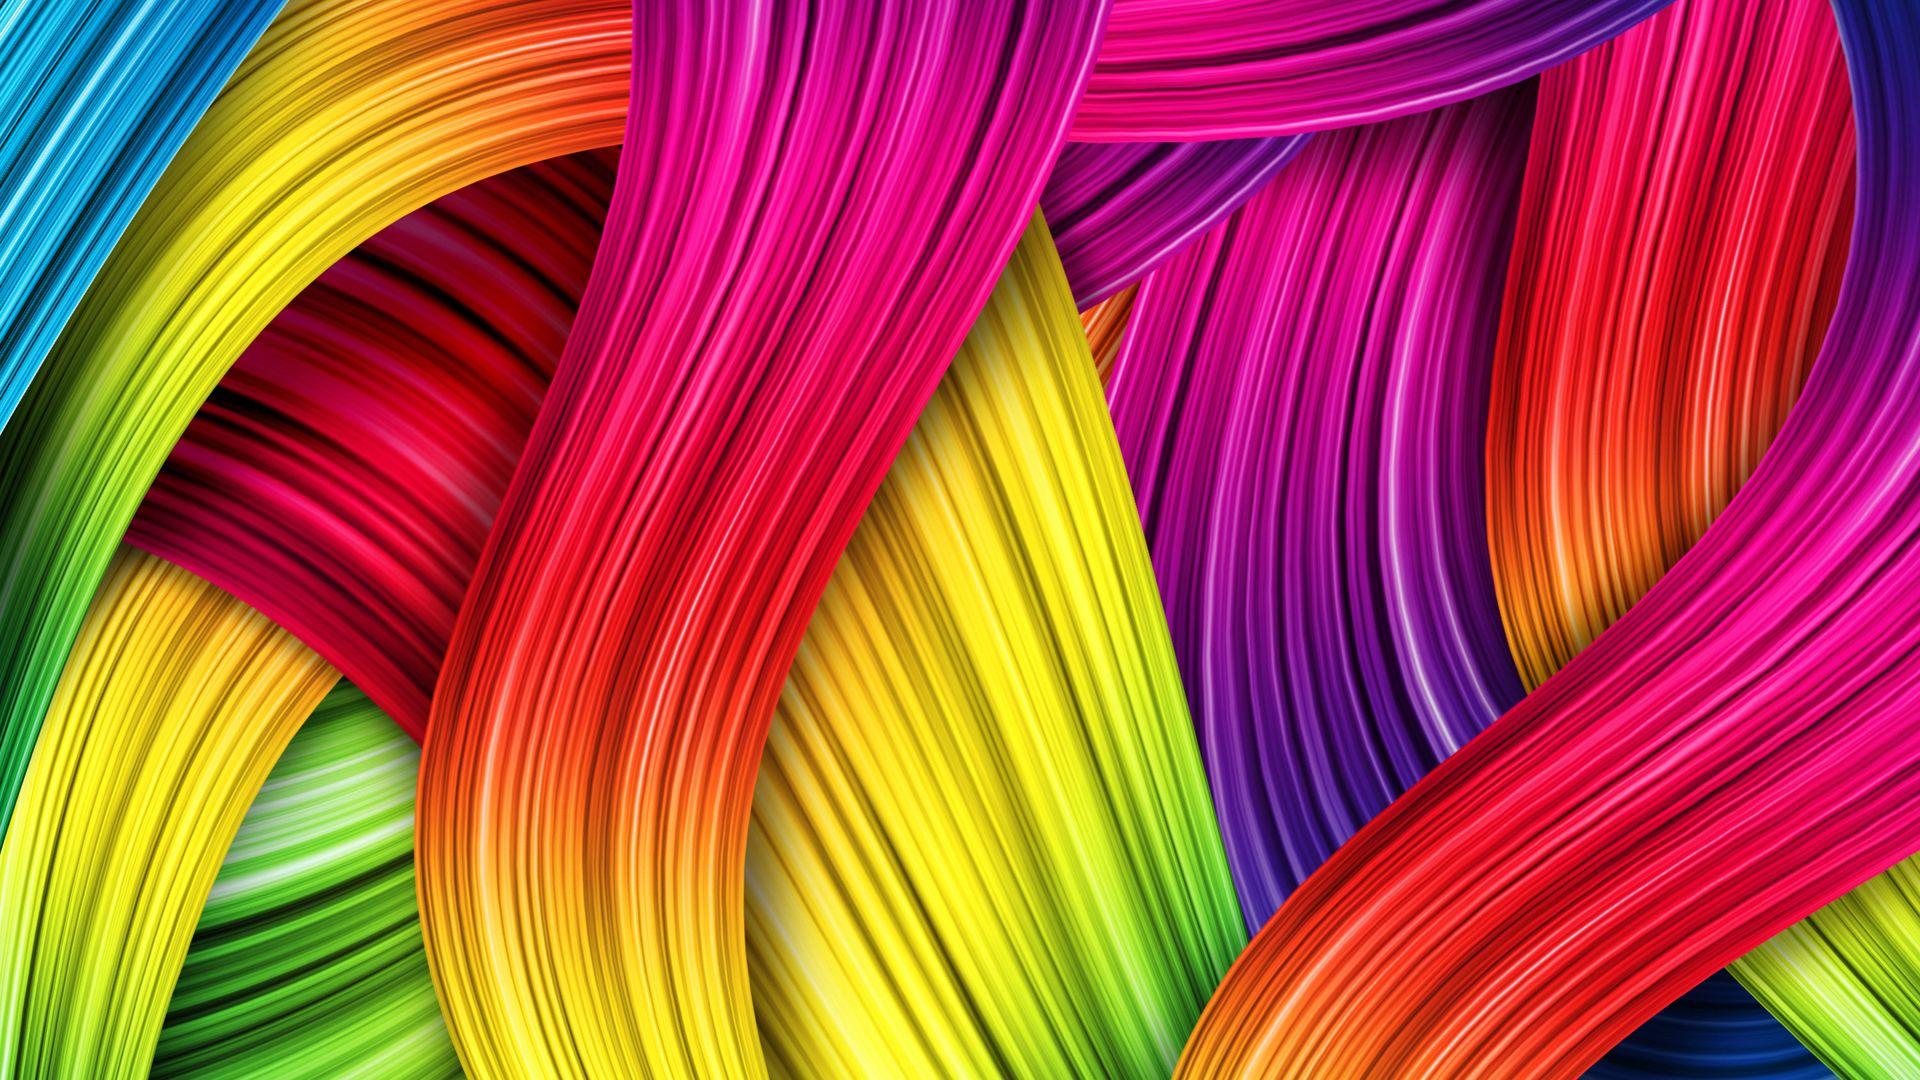 Wallpaper.wiki Awesome Colorful Hd Wallpaper PIC WPD0013838